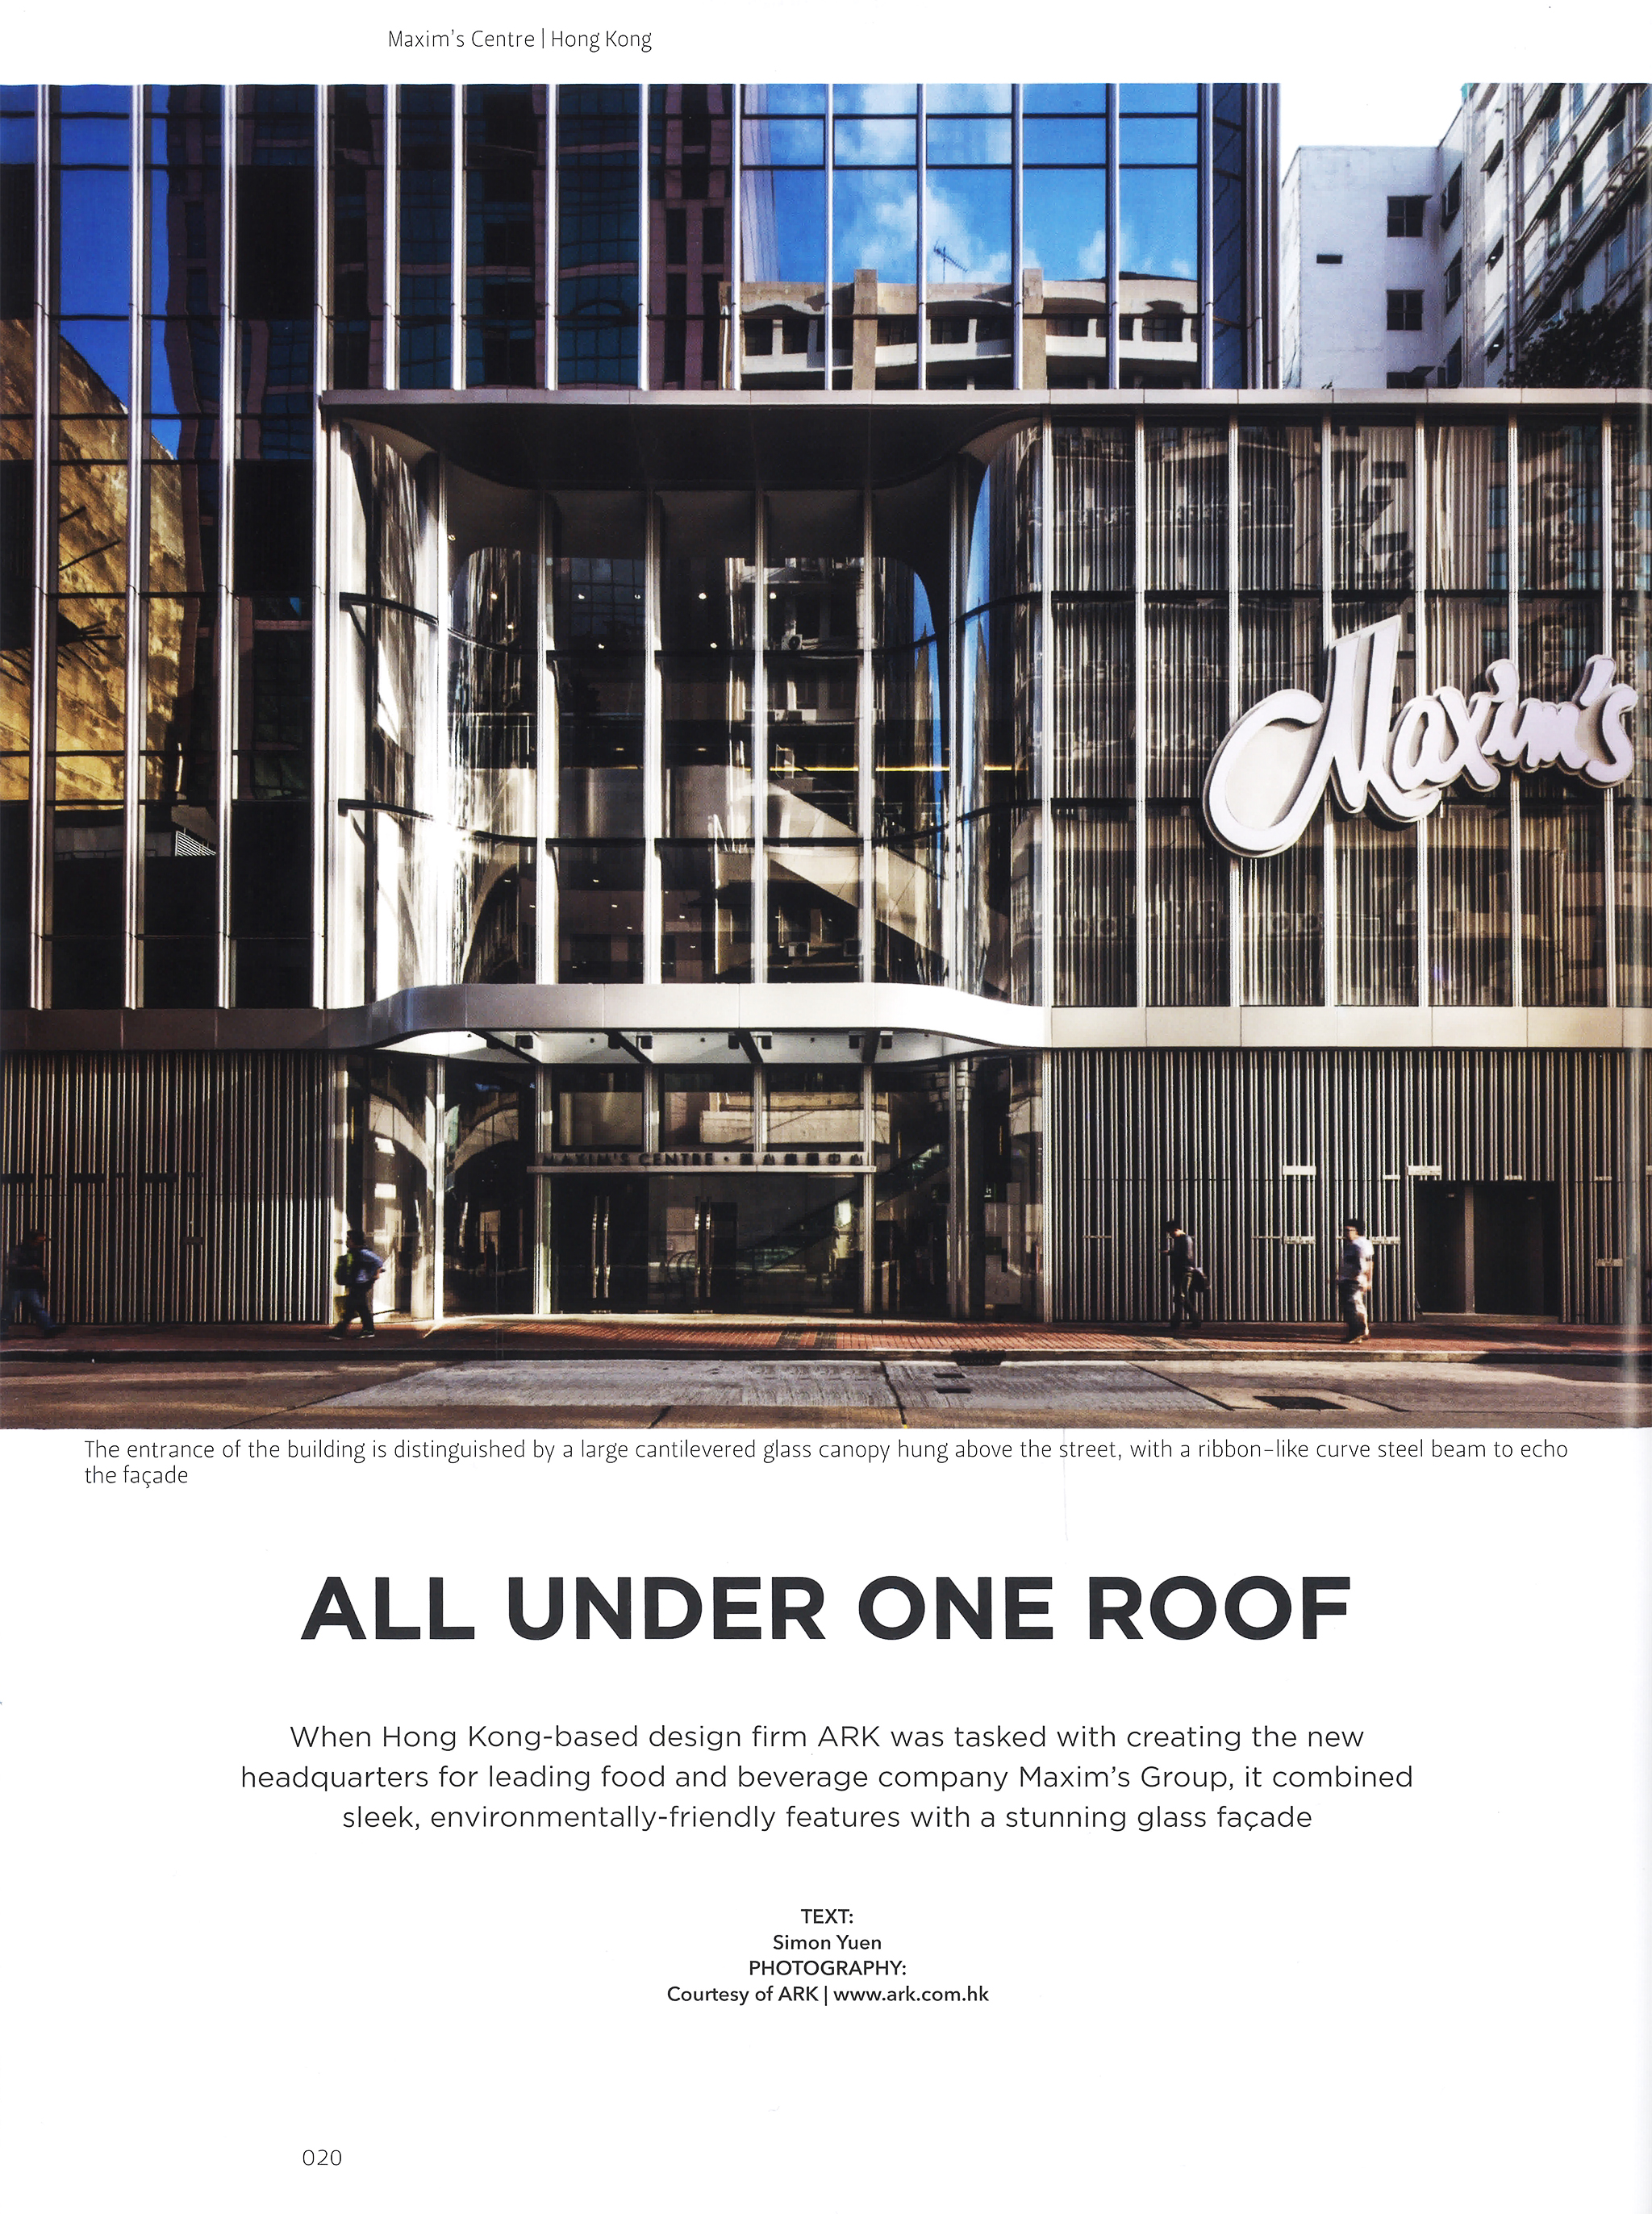 Perspective, 'All Under One Roof'